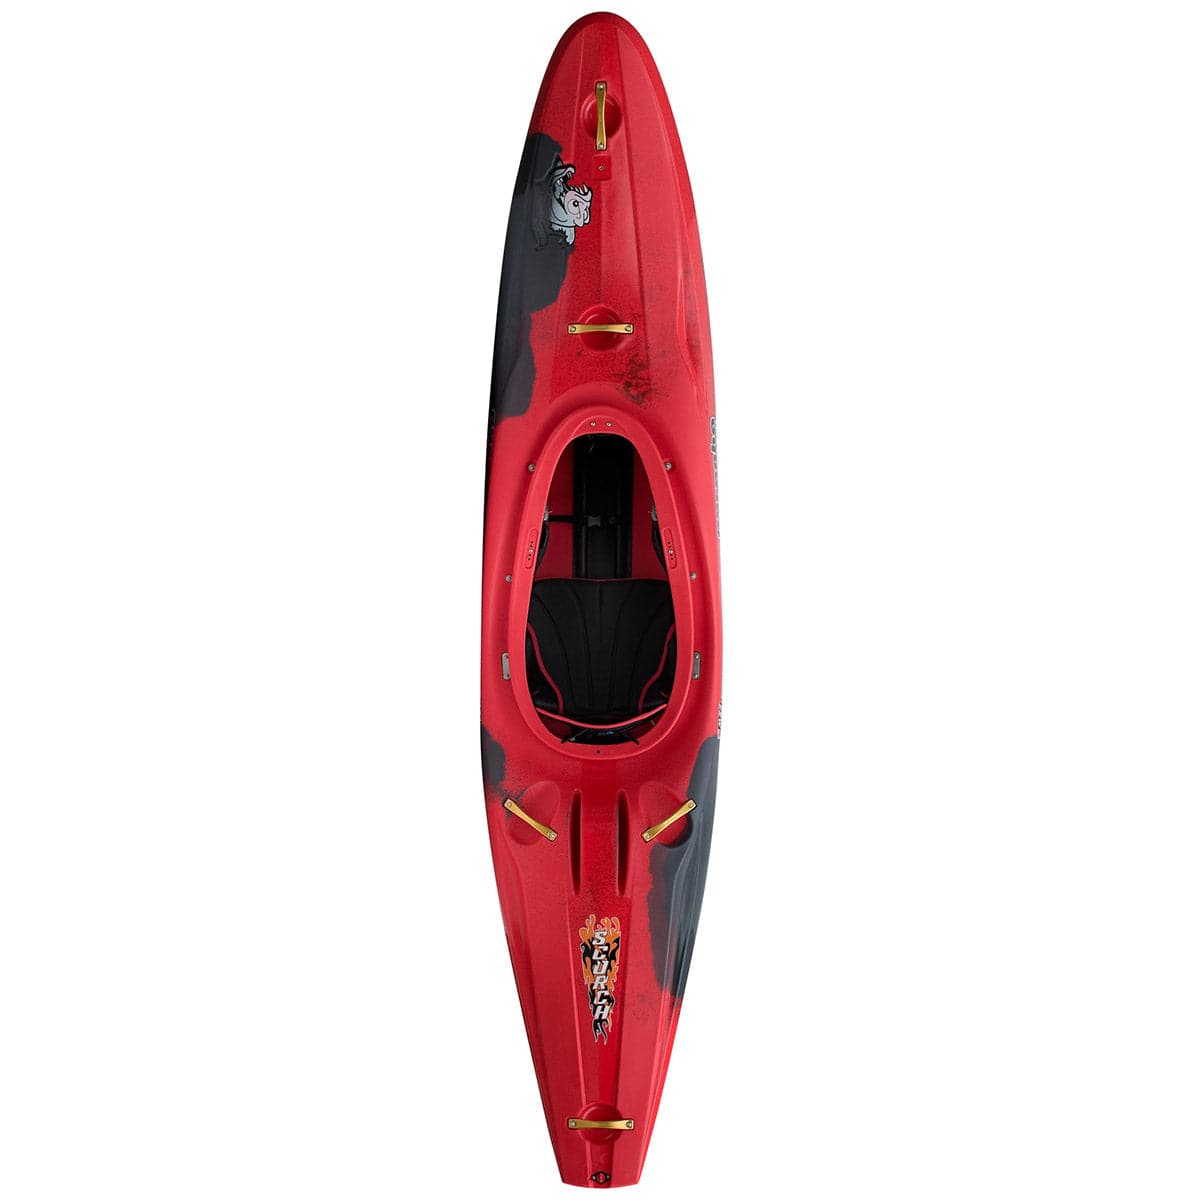 Featuring the Scorch X creek boat, river runner kayak manufactured by Pyranha shown here from a second angle.